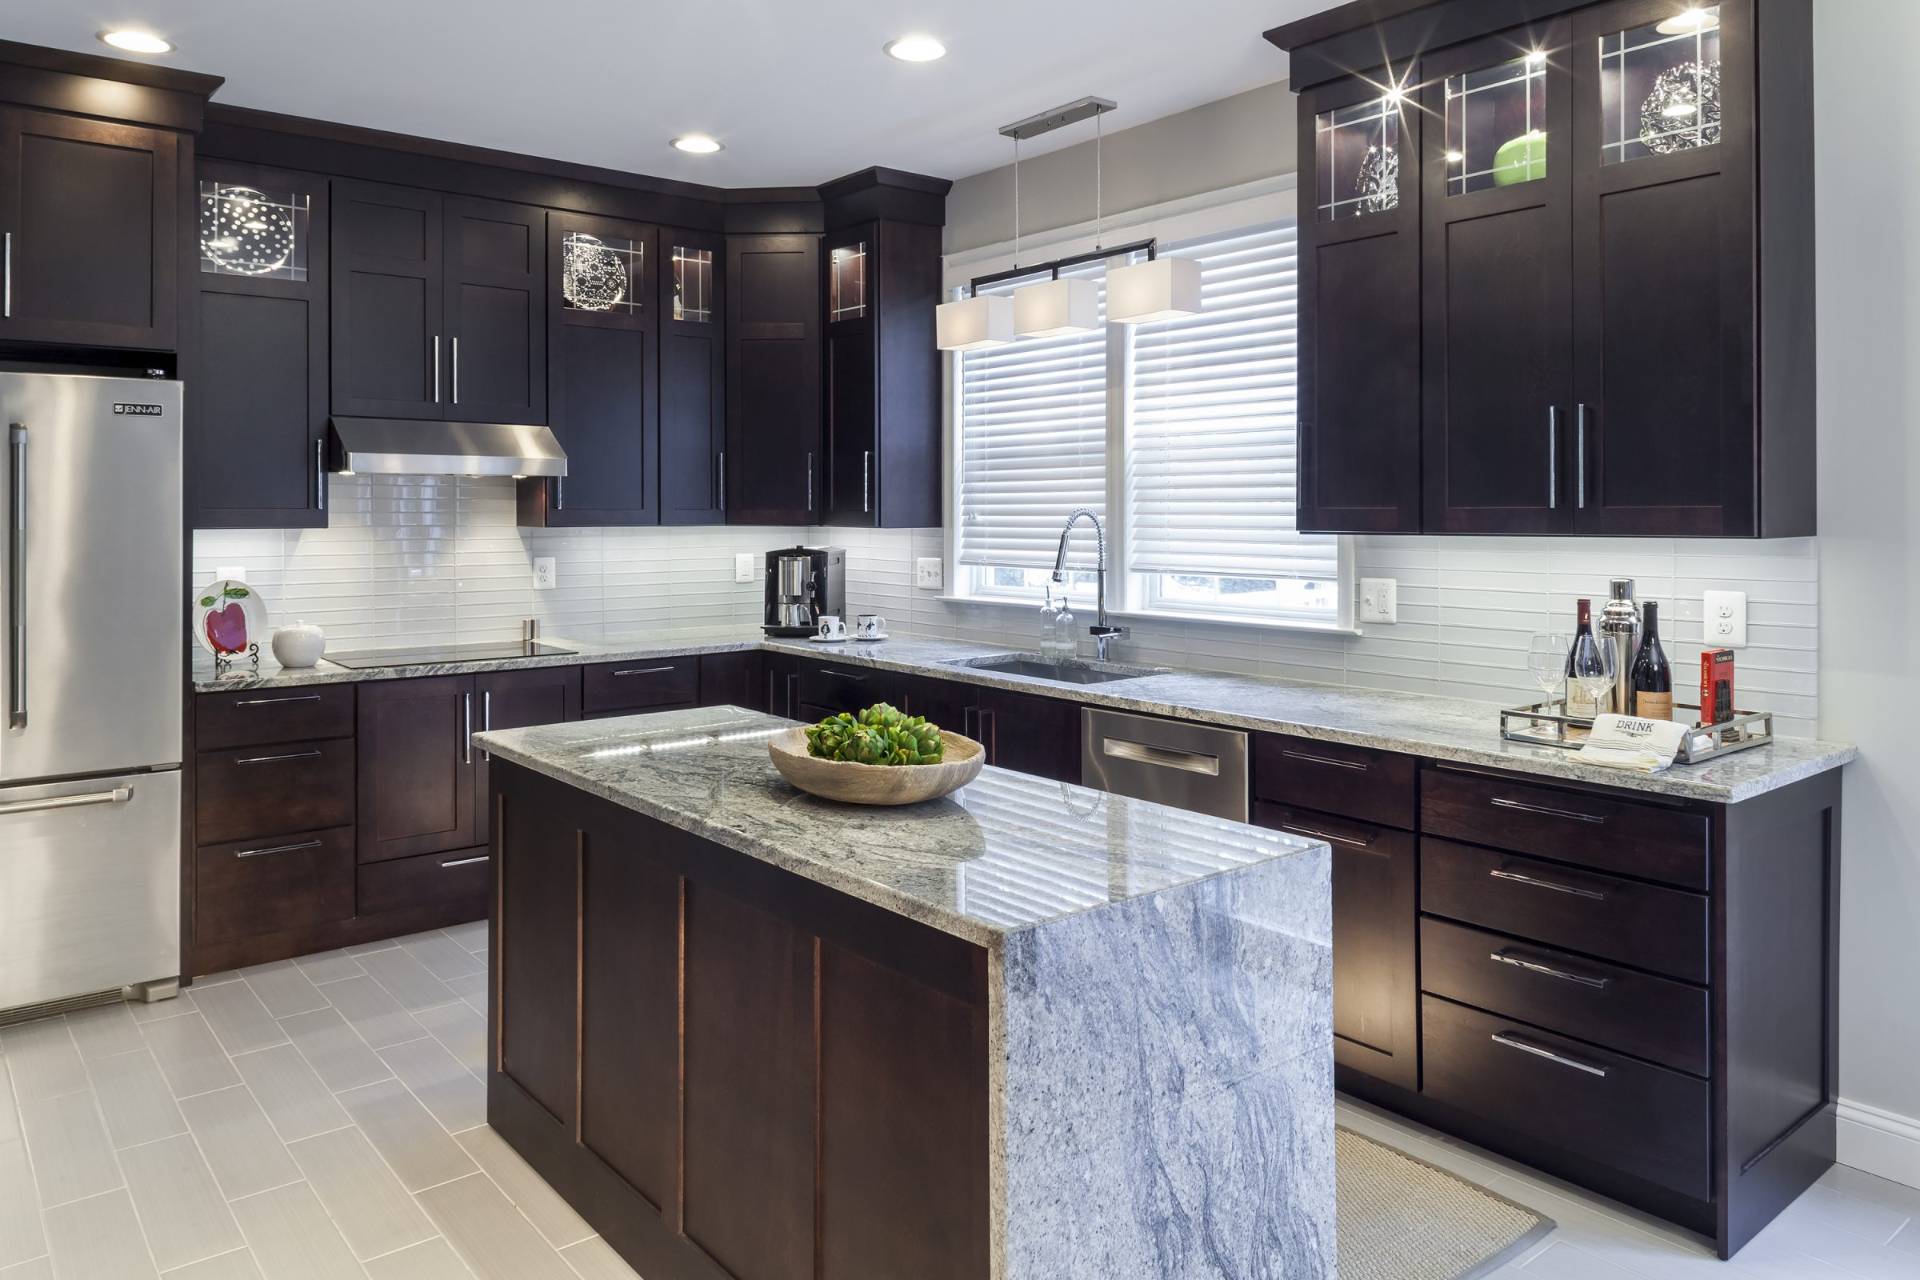 Kitchens with black cabinets